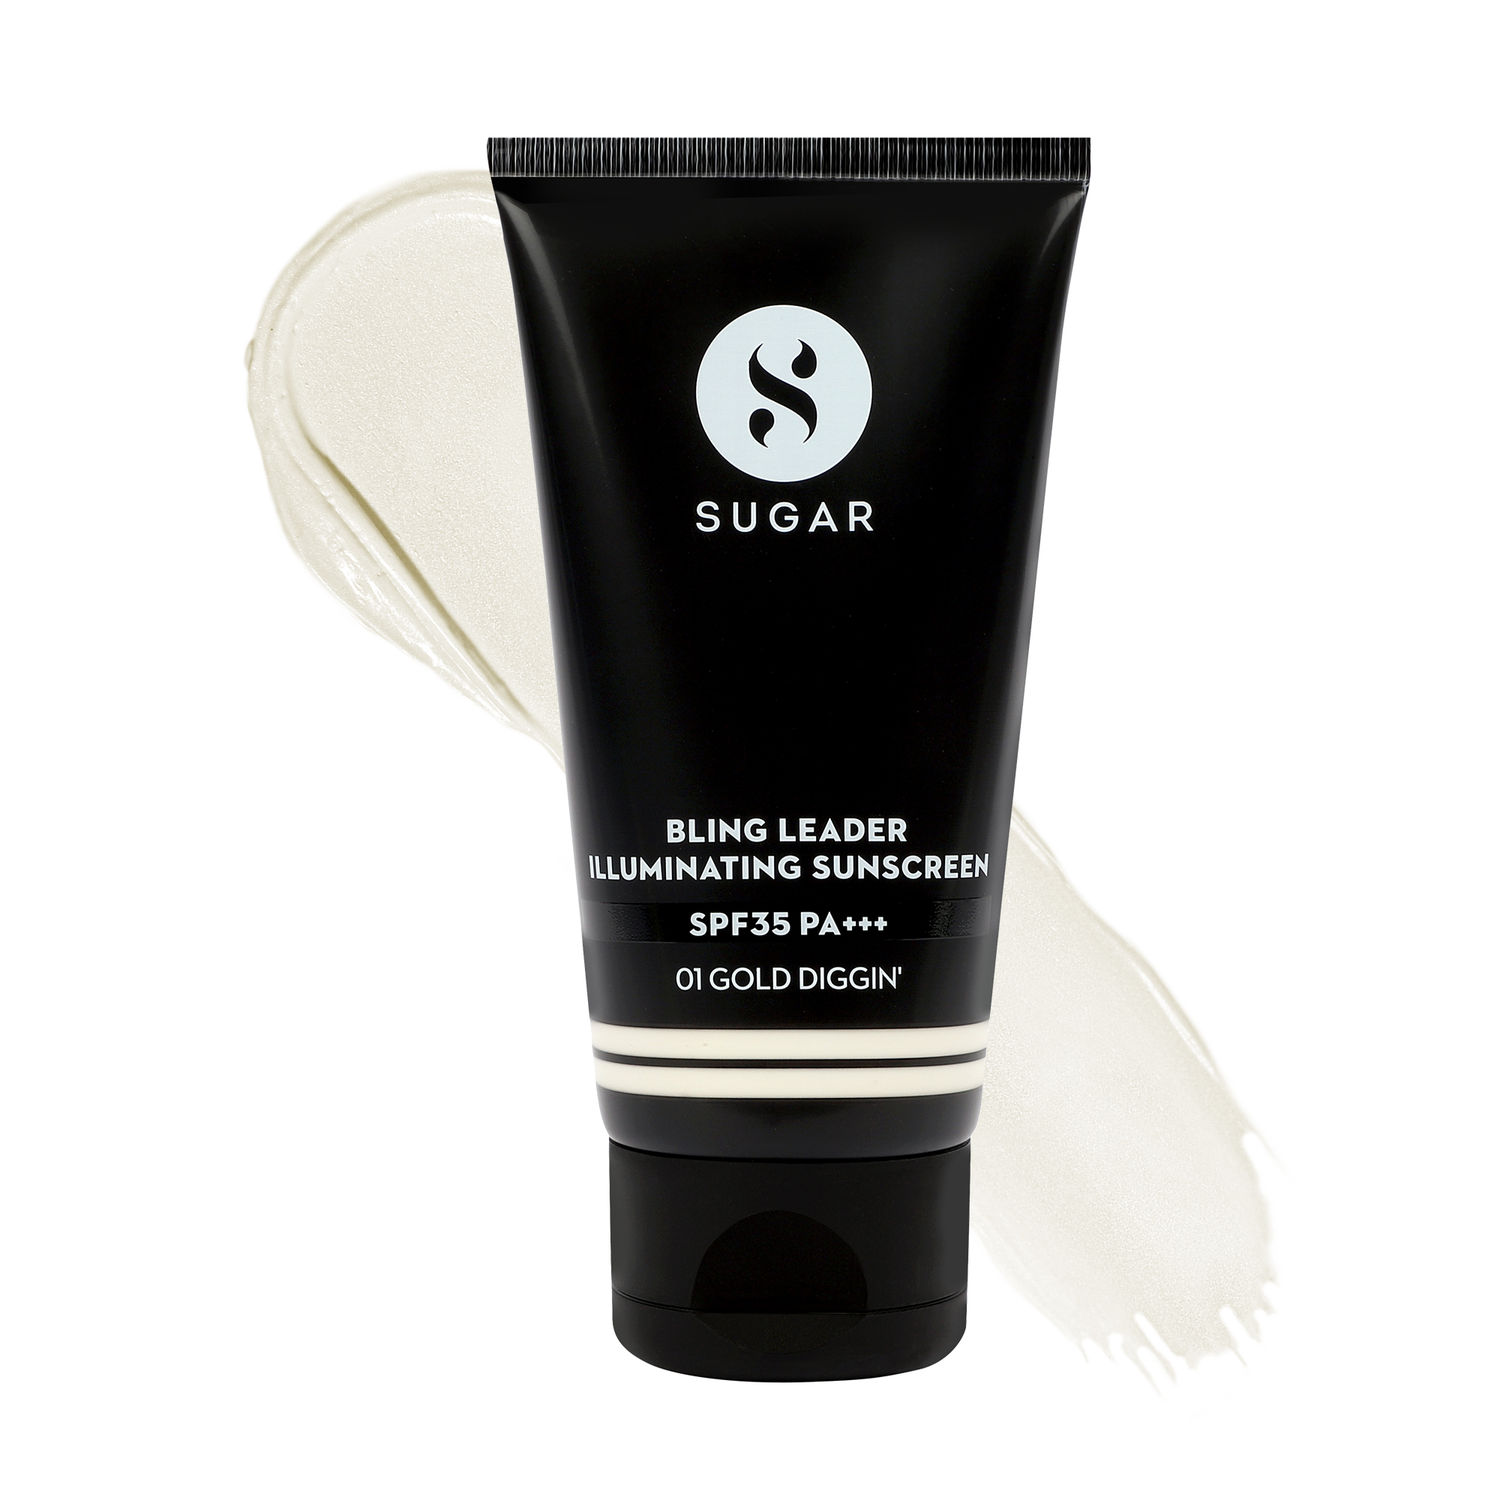 Buy SUGAR Cosmetics Bling Leader Illuminating Sunscreen SPF35 PA+++ - 01 Gold Diggin| 3 in 1 Glow Boosting Formula | Lightweight, Non - Greasy & Hydrating - 50 gm - Purplle